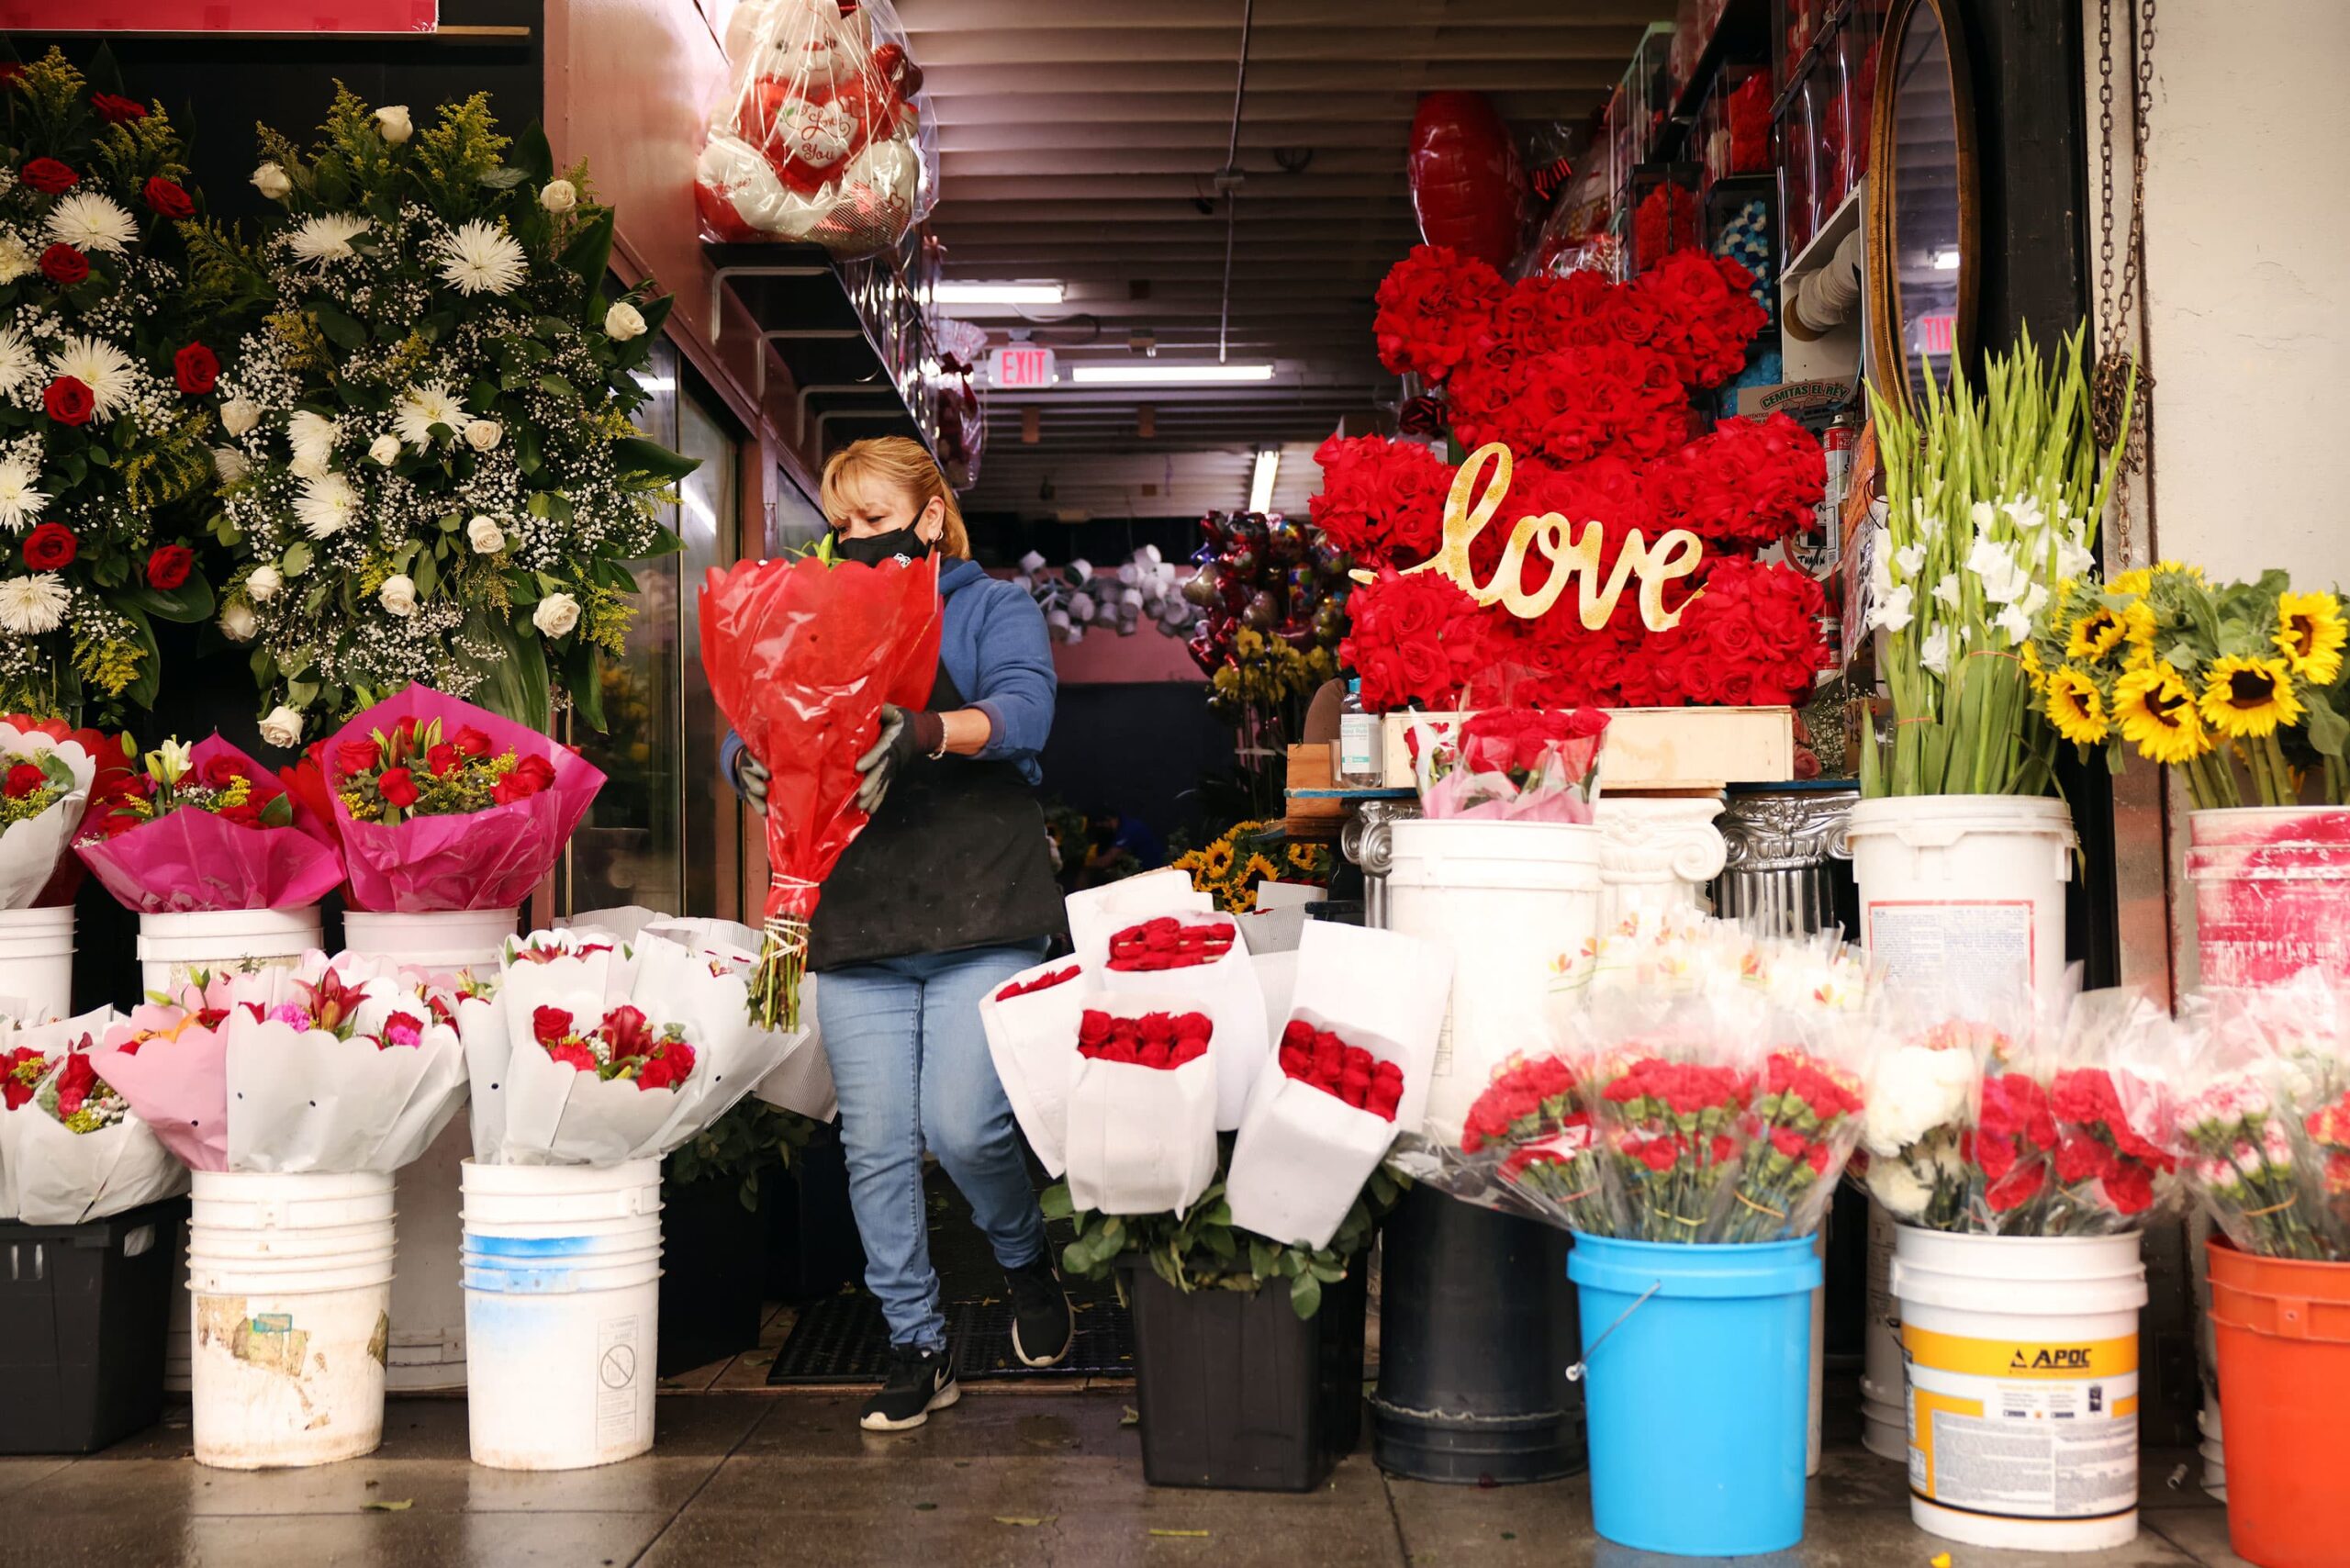 Inflation means price jumps for dinner and roses this Valentine’s Day